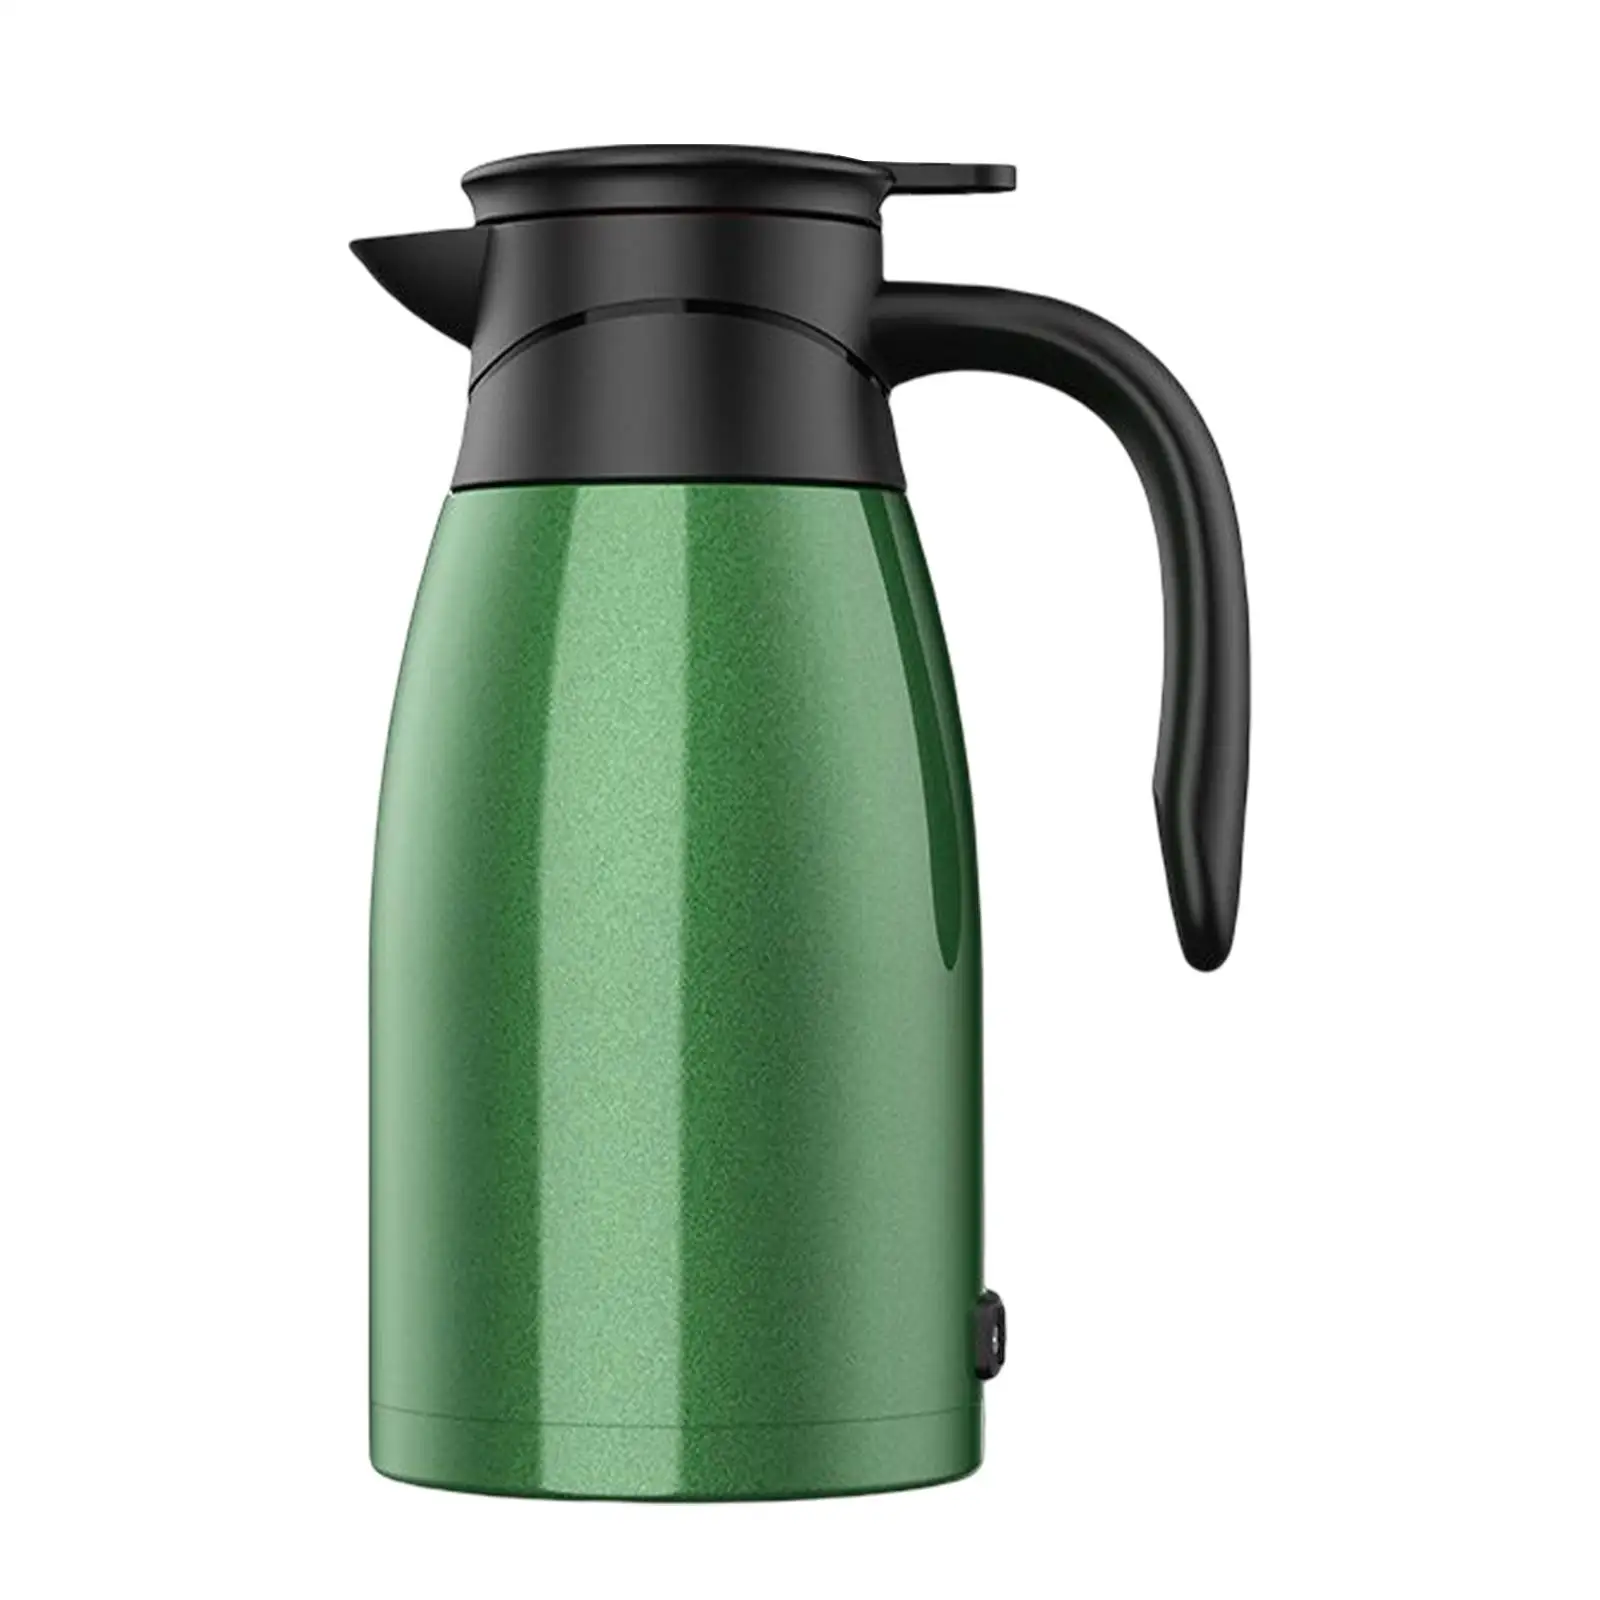 12V Car Kettle Boiler Temp Display 1400ml Heating Cup Heated Water Boiler Hot Water Kettle for Outdoor Camping Travel